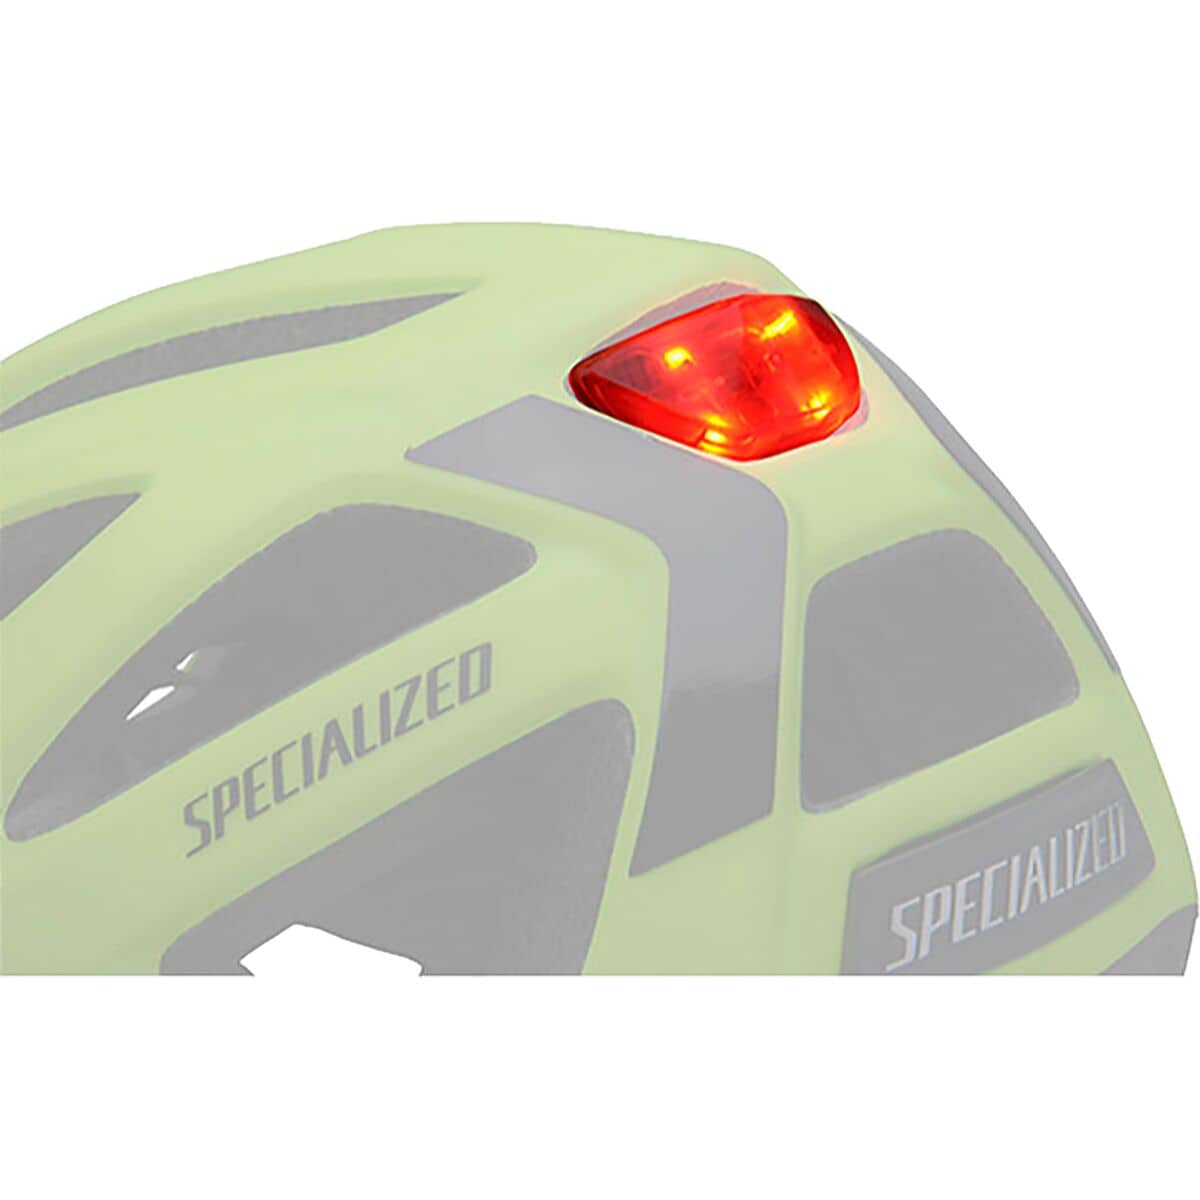 Specialized Centro LED Light One Color, One Size